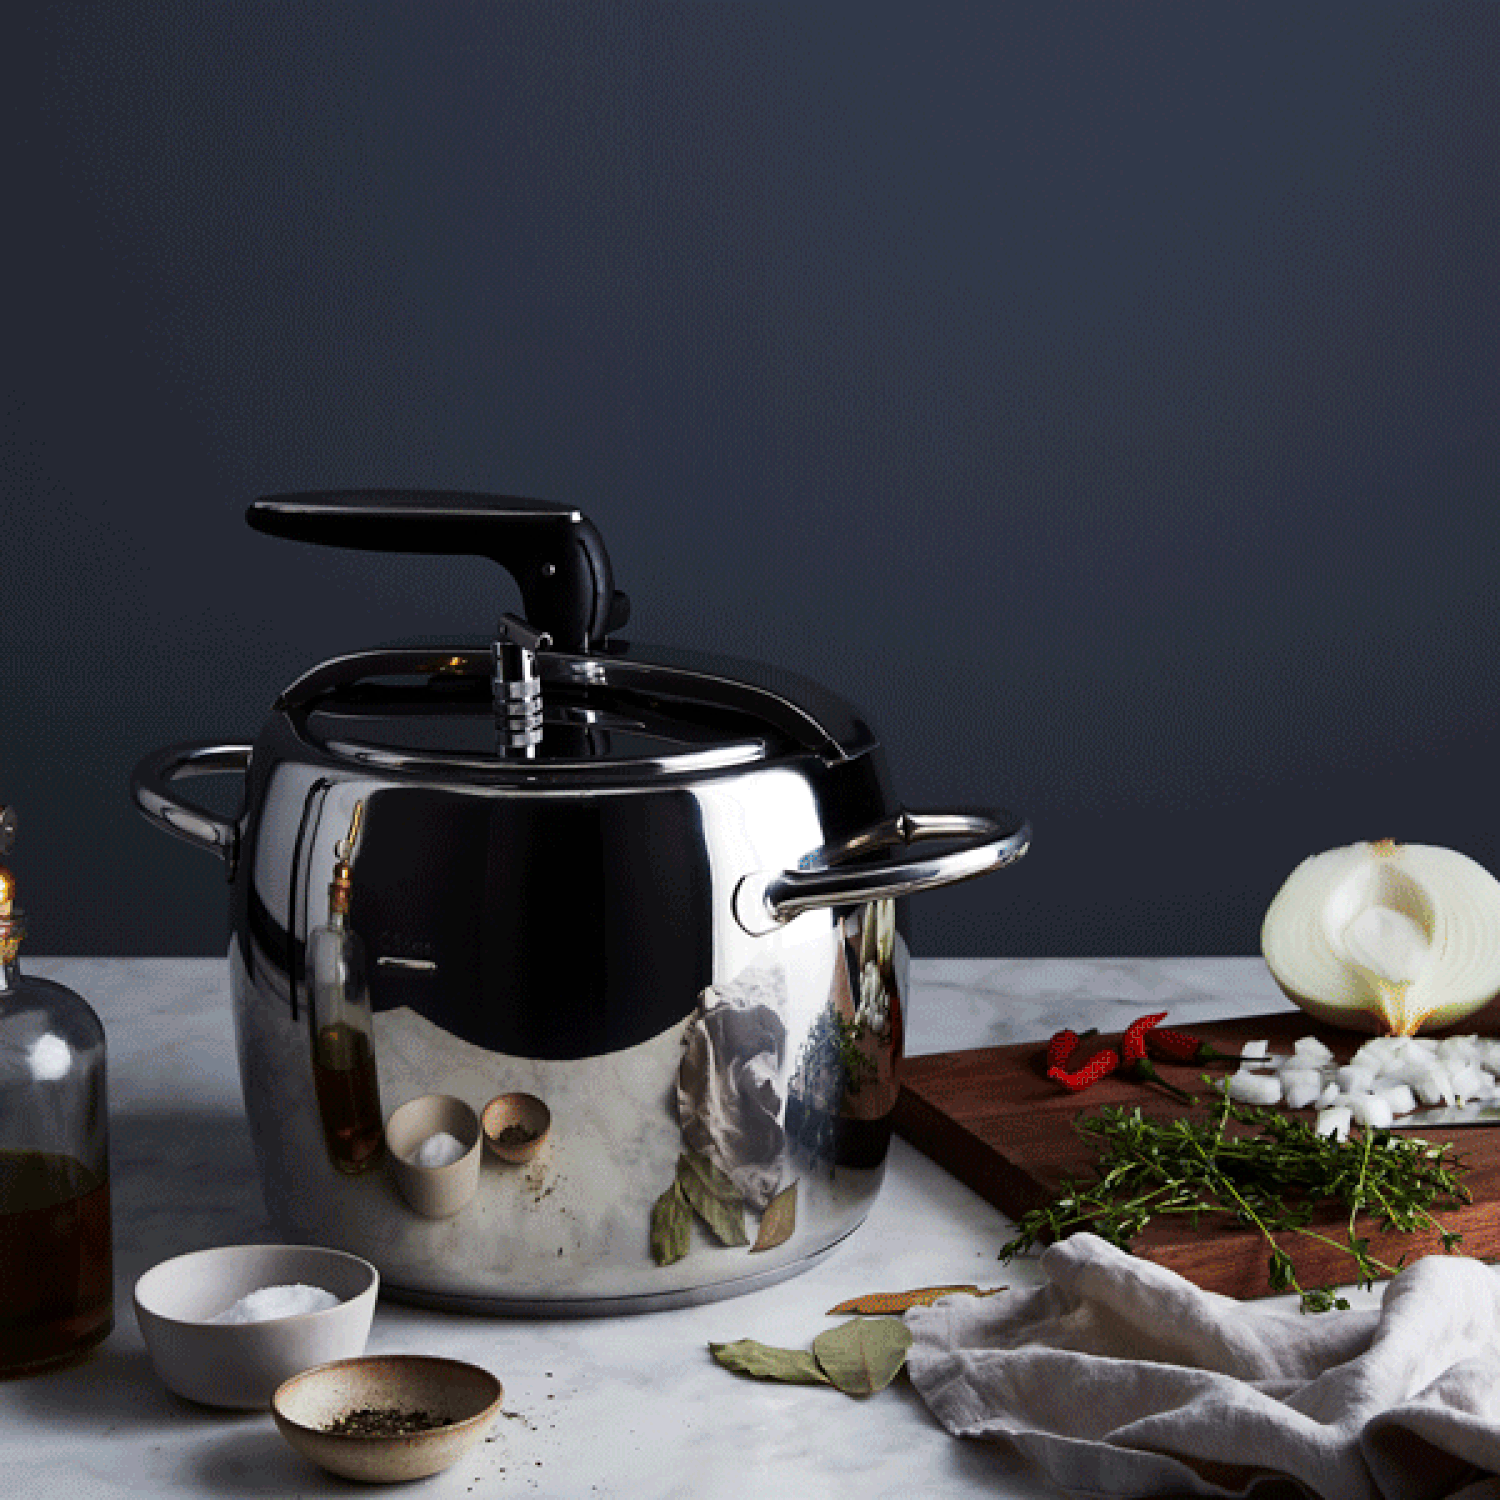 Mepra Stovetop Pressure Cooker from Italy for Beans, Risotto, & More on  Food52